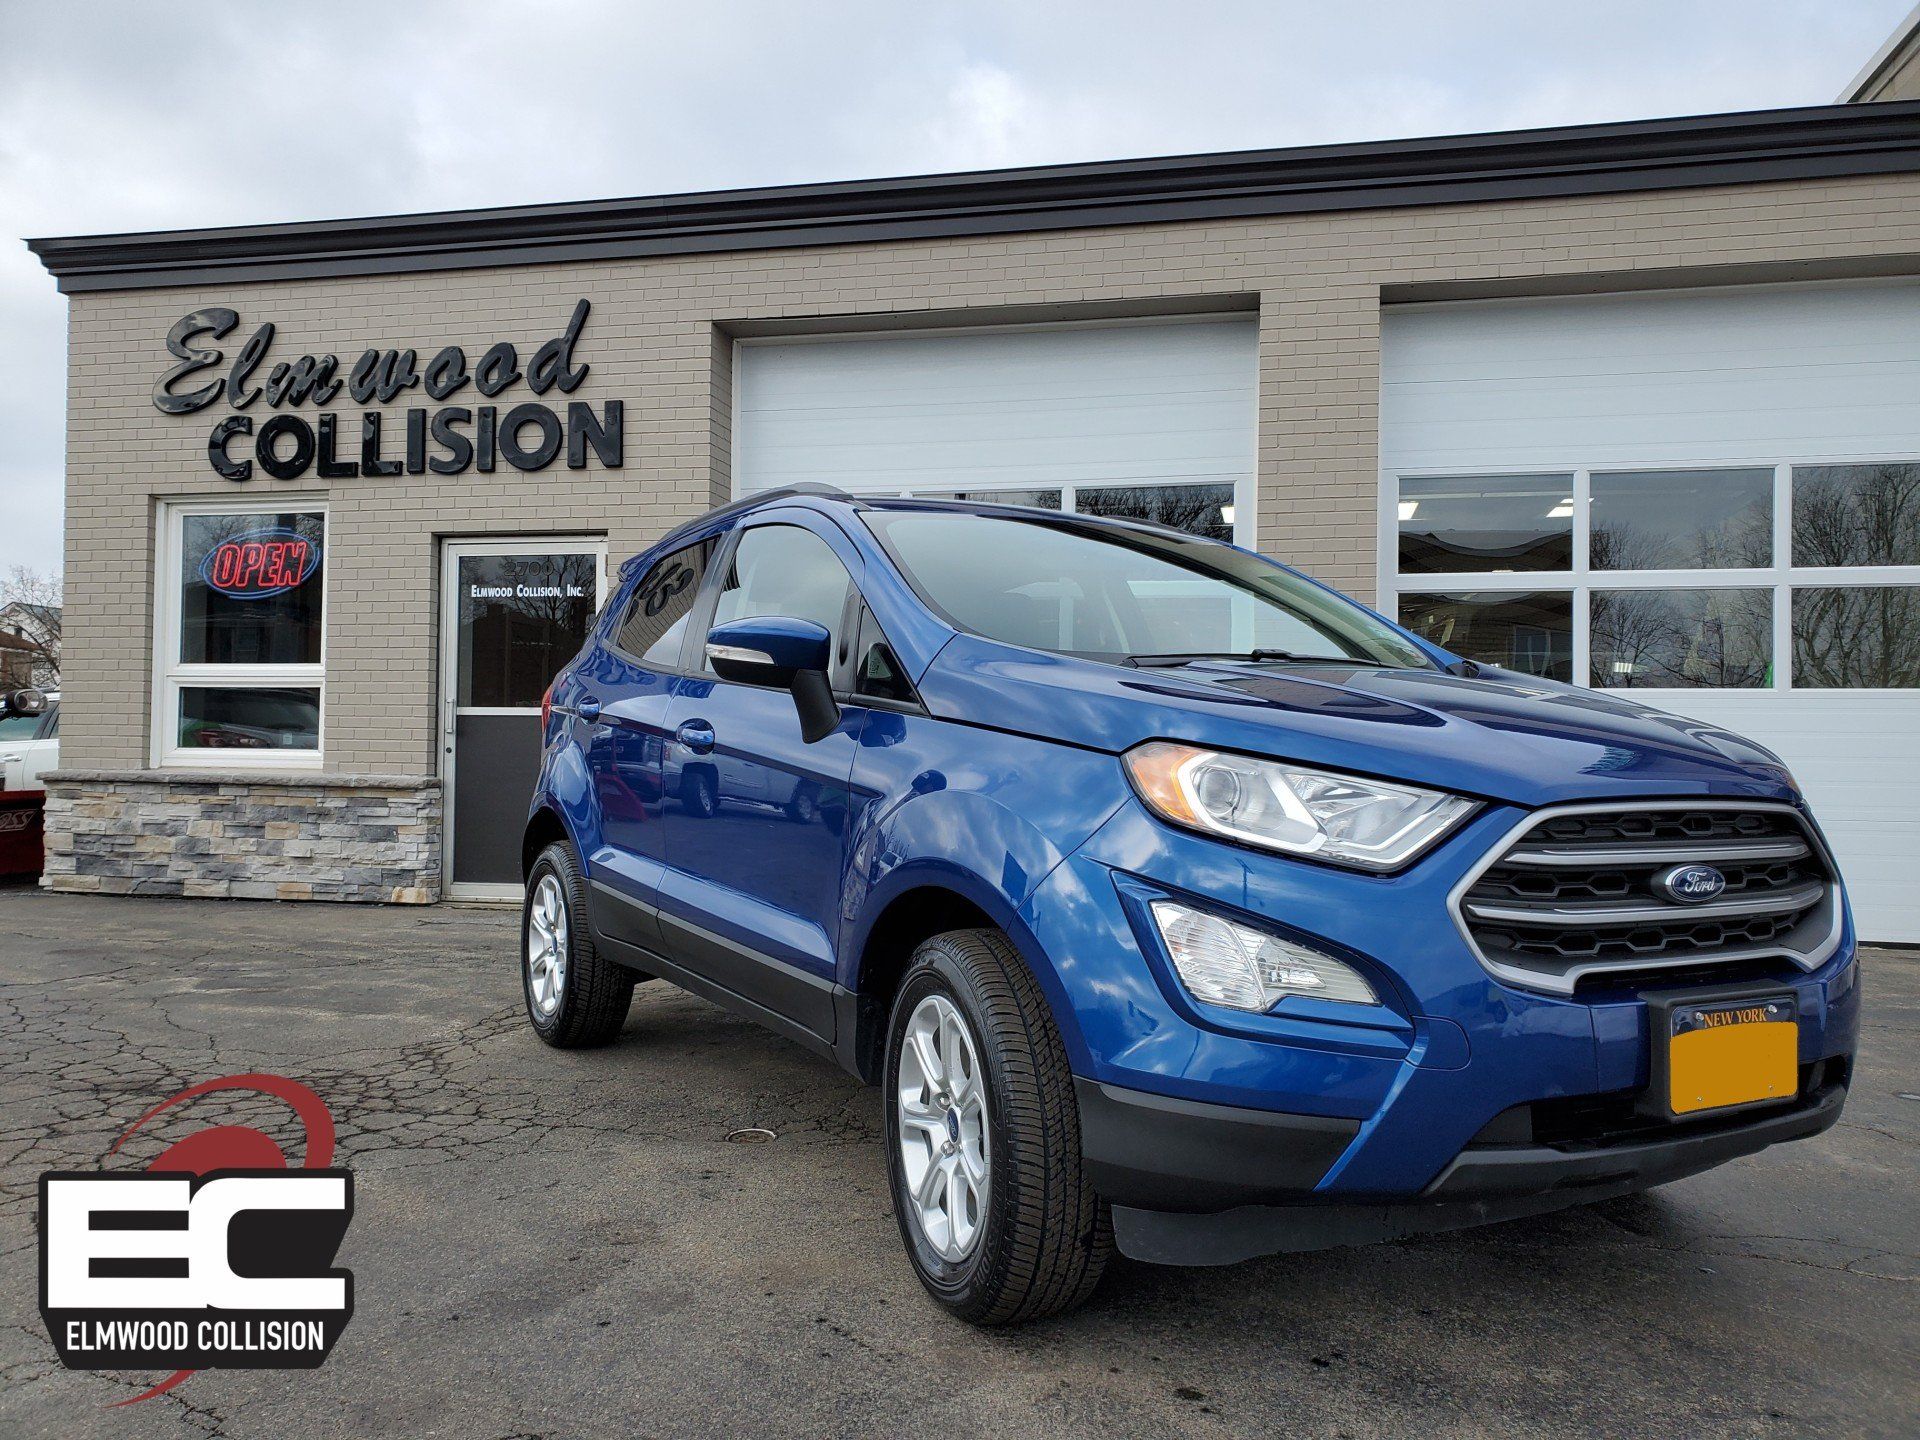 2019 Ford EcoSport repair complete with vehicle parked outside Elmwood Collision